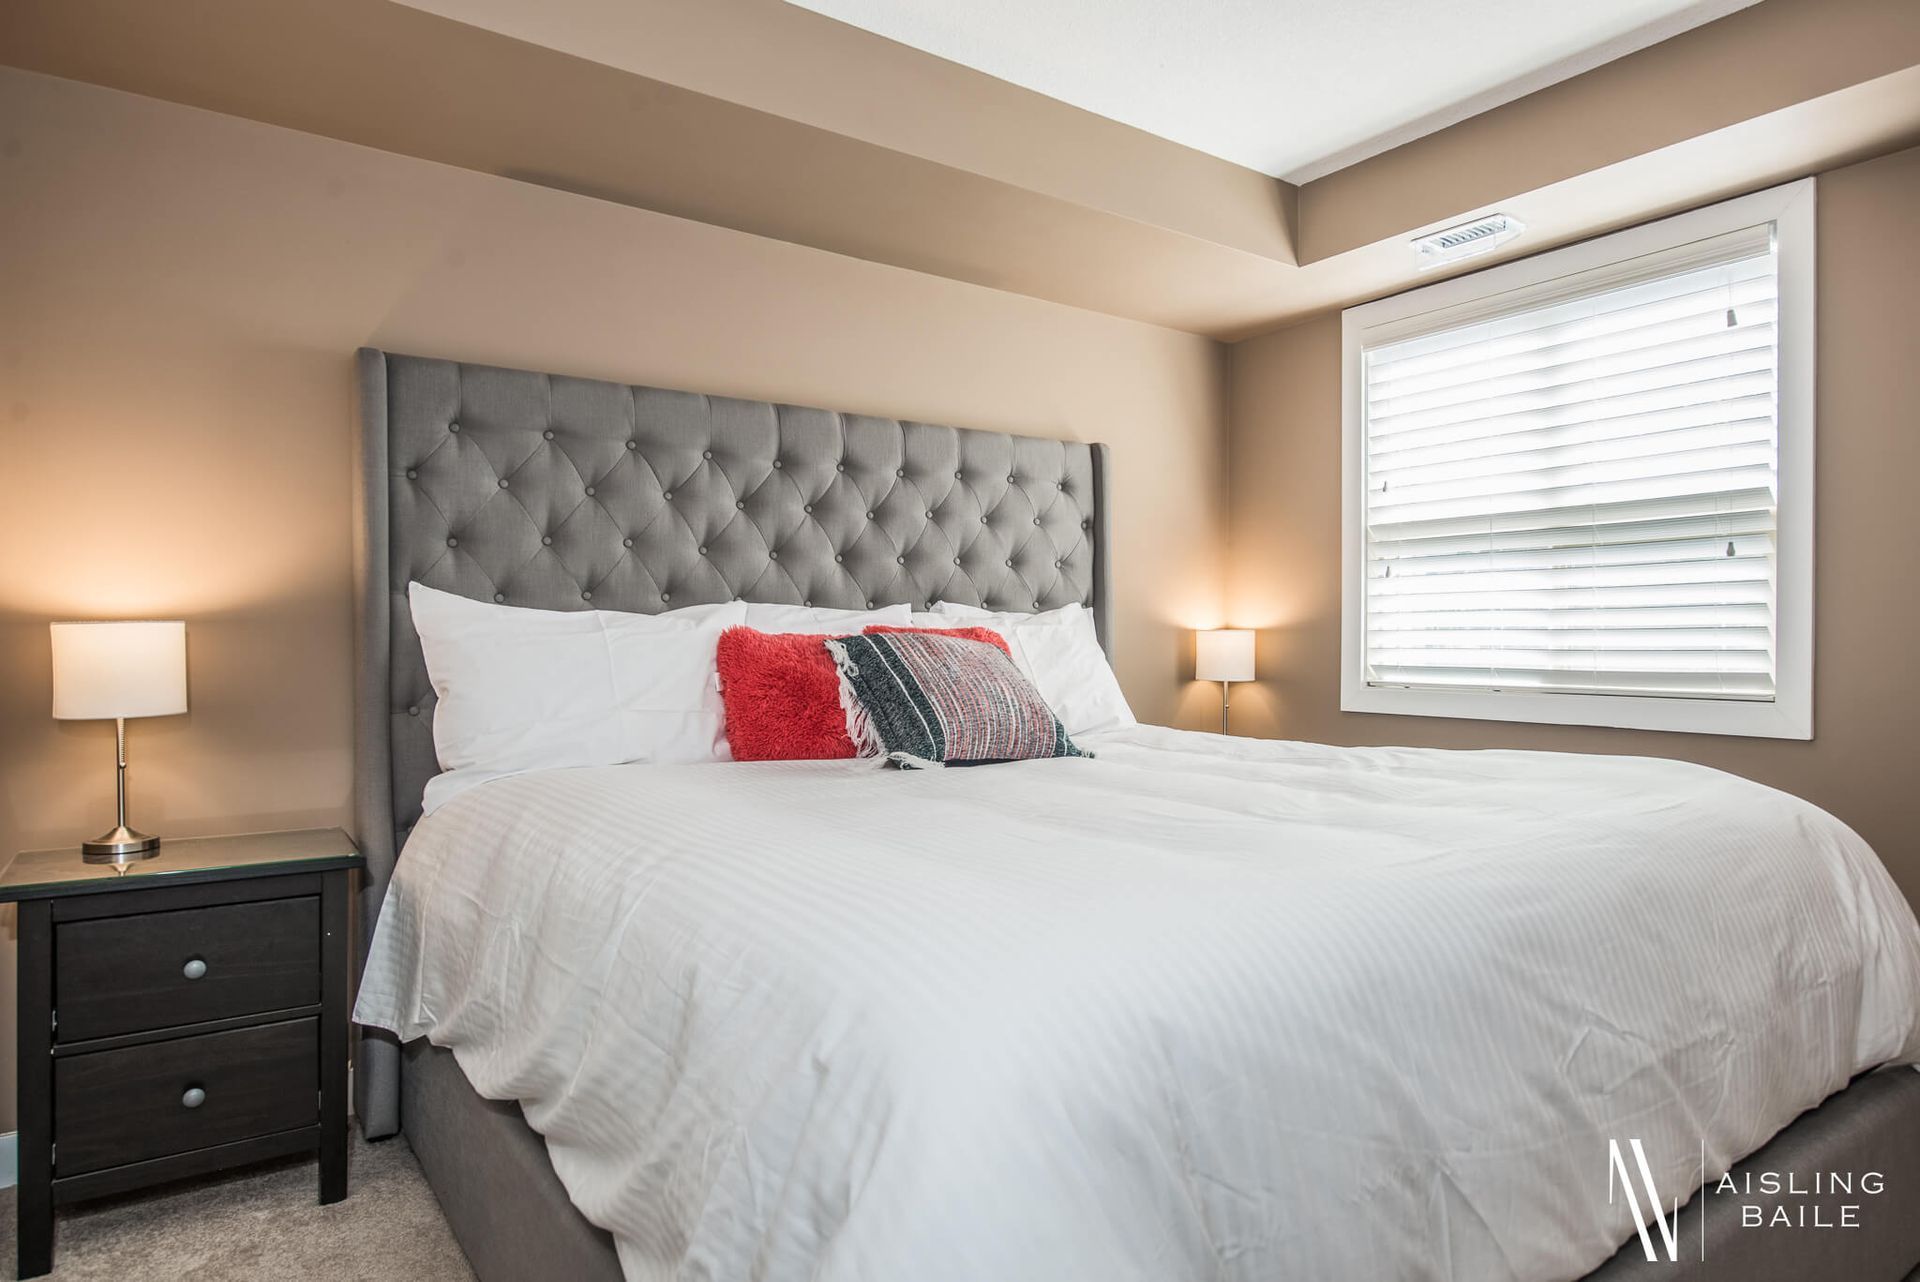 Primary bedroom with a king bed in the Stylish condo of Lake Windermere Pointe in Invermere, a BC Vacation Rental hosted by Aisling Baile Property Management.